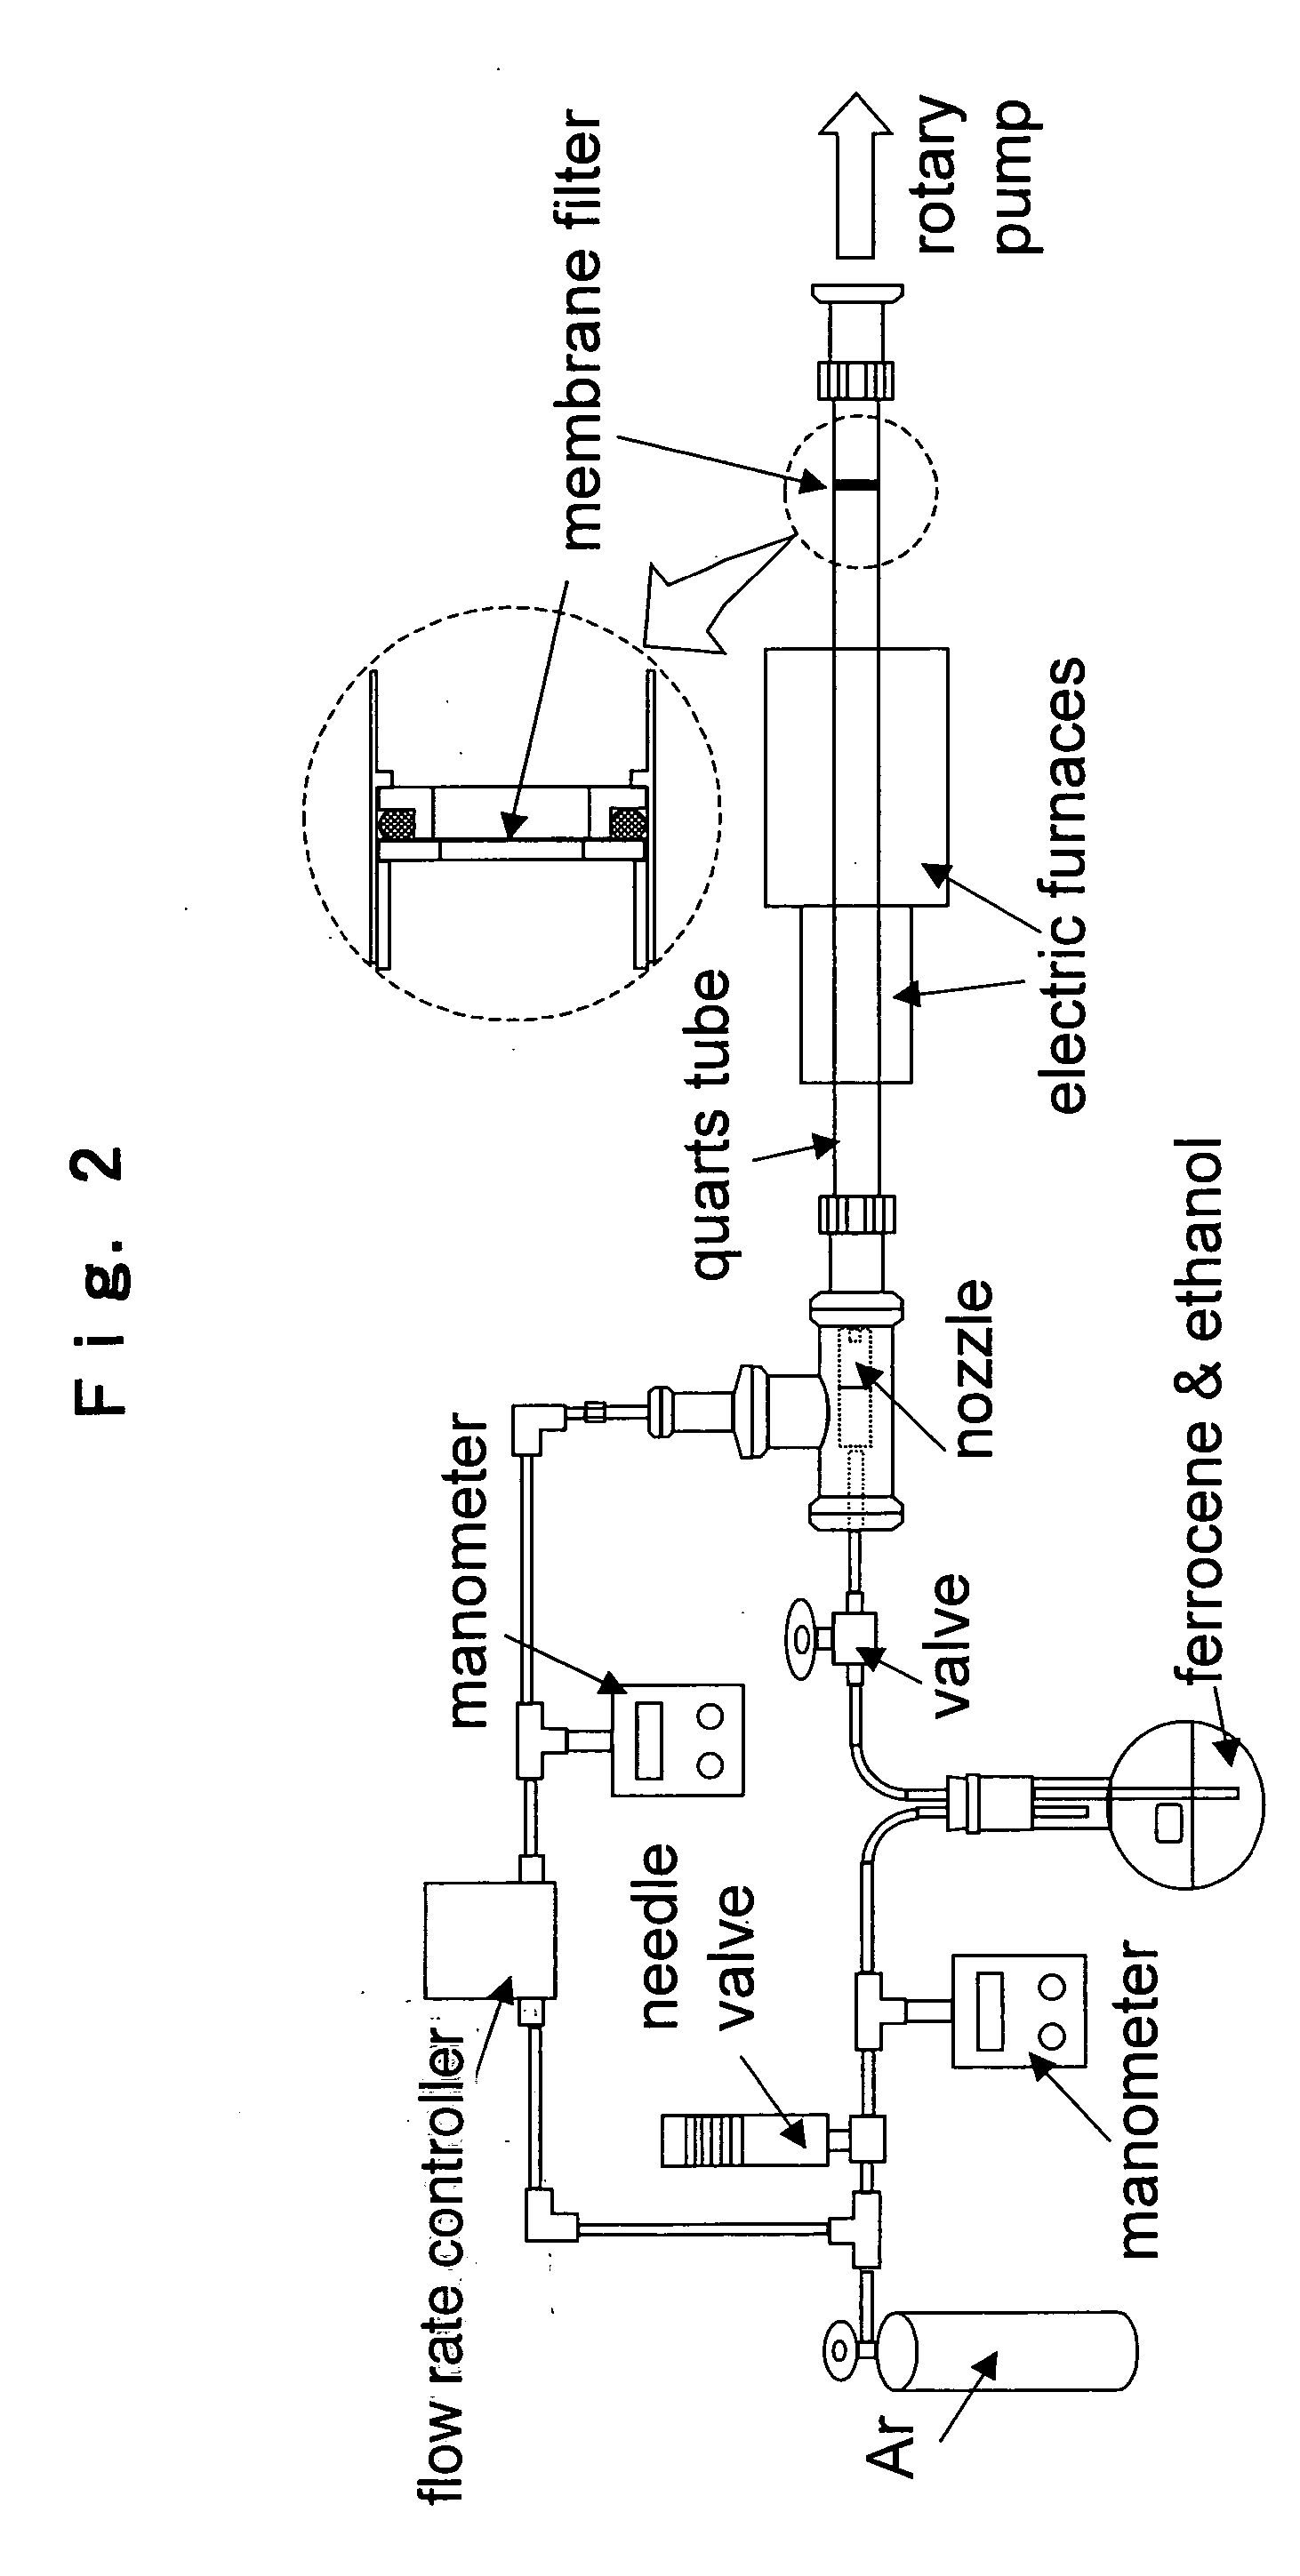 Process and apparatus for producing single-walled carbon nanotube